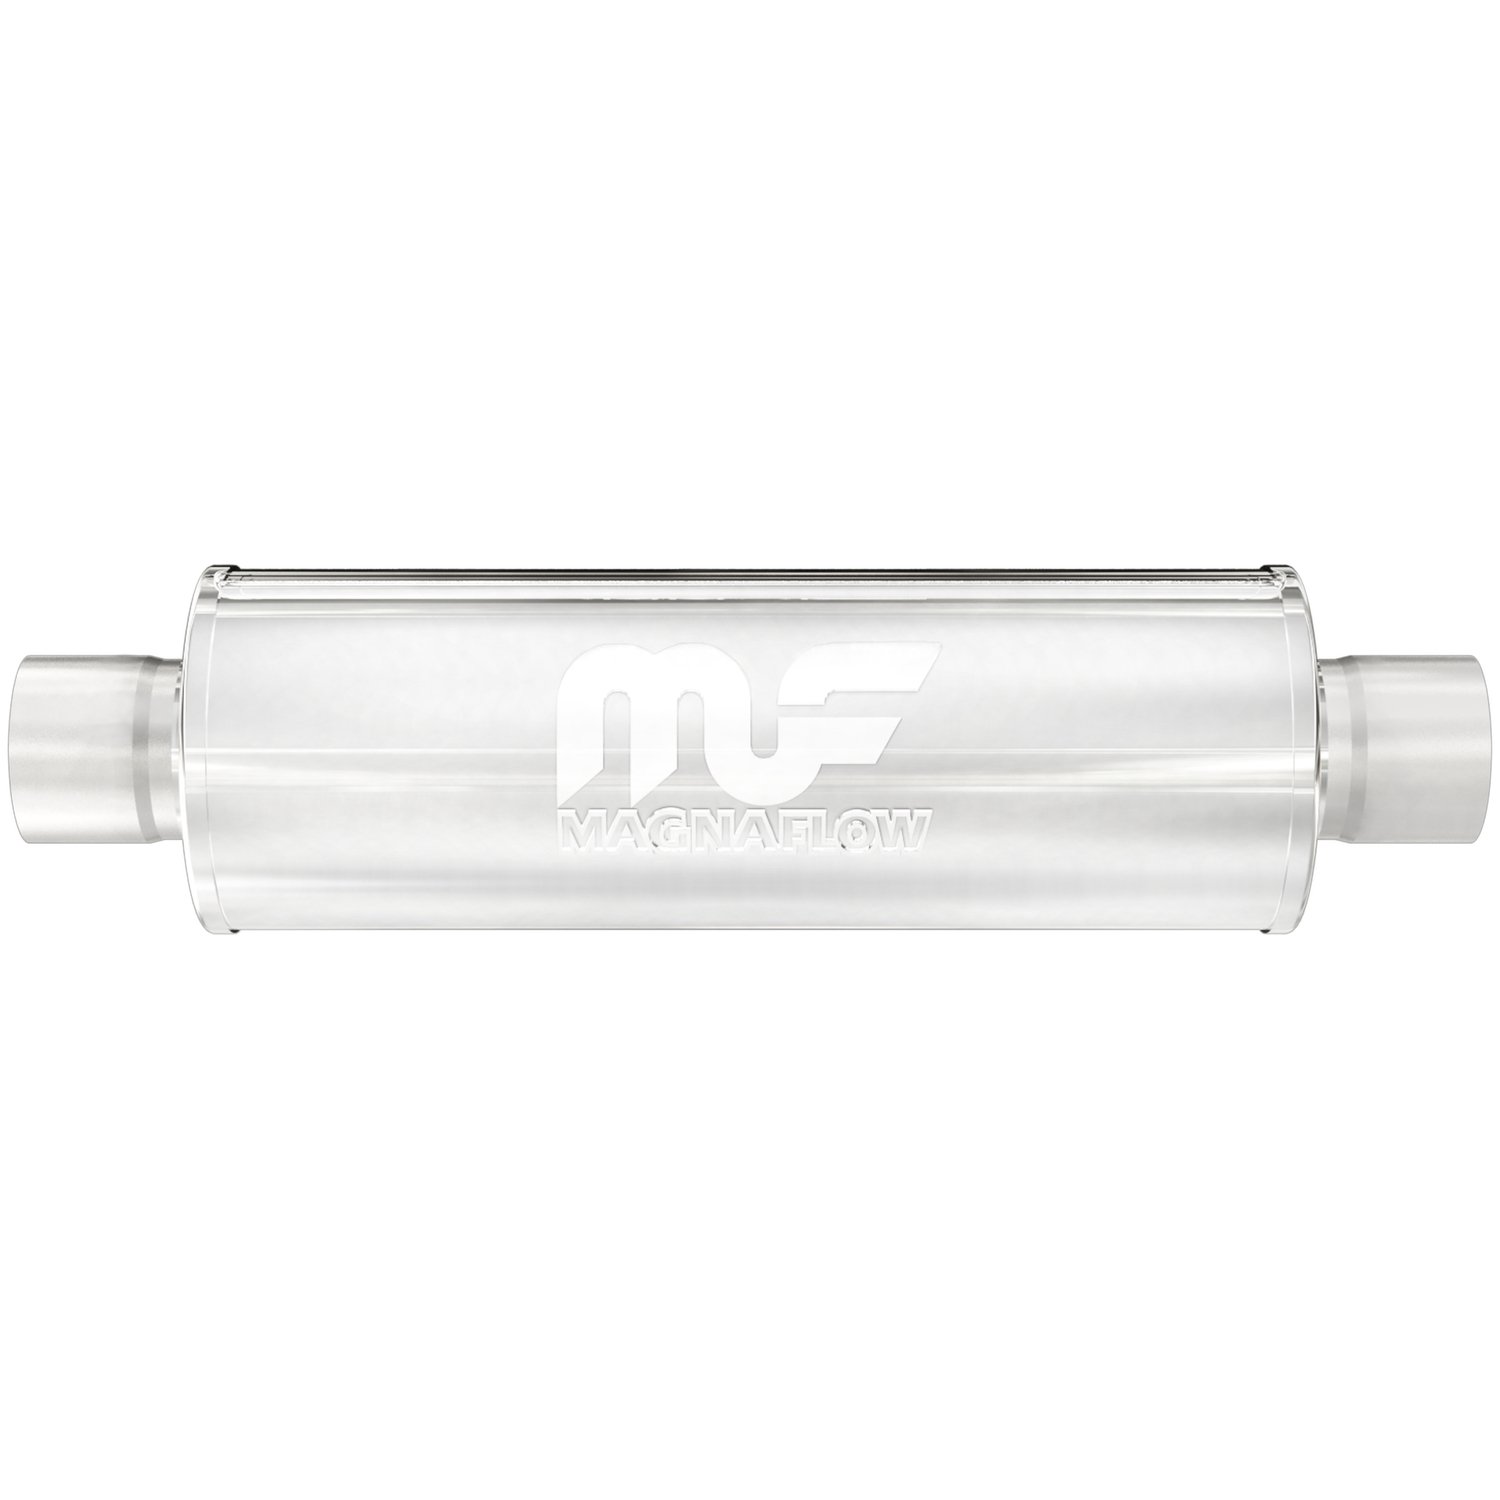 6" Round Muffler Center In/Center Out: 3" Body Length: 14" Overall Length: 20" Core Size: 3" Satin Finish